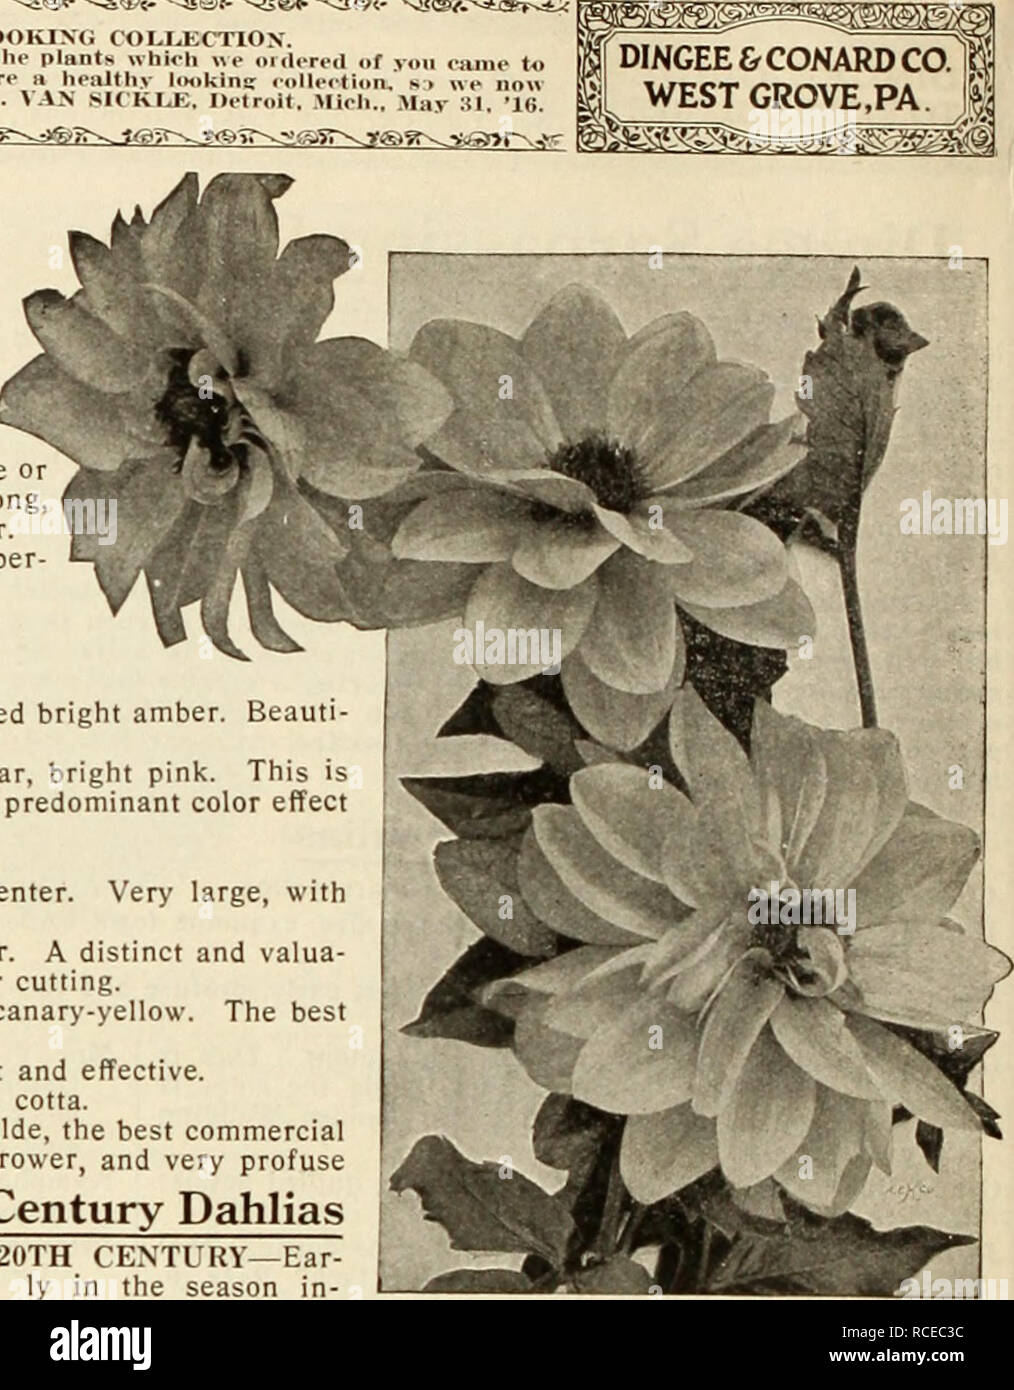 . Dingee guide to rose culture : 1917. . reony-flowercd Dahlia. i lu tus Dahlia. tips and base of petals, but as the season advances the flowers open lighter, until by October they are nearly white, a bright pink blotch in the center of the petals. FRINGED 20TH CENTURY—The first of a new race, with cleft or serrated petals. A great improvement of 20th Century, much larger, brighter color, while the stems are long, slender and stiff. Bright rosy crimson, with lighter markings. Height 4 feet GIGANTEA ALBA CENTURY—Snow white, of immense size, beautiful form; produced in endless profusion on long, Stock Photo